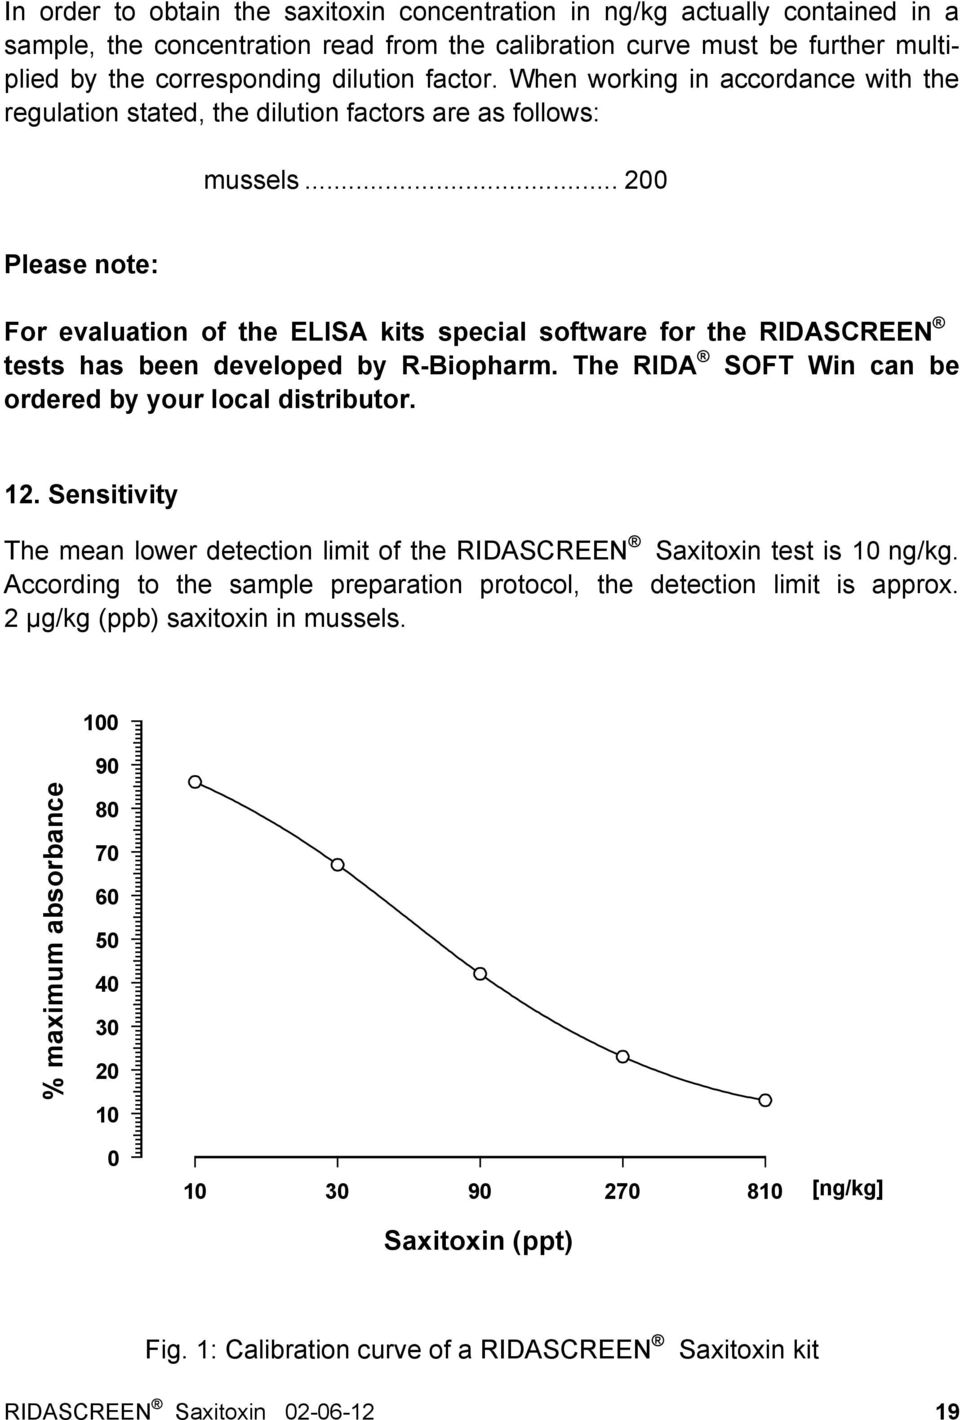 .. 200 Please note: For evaluation of the ELISA kits special software for the RIDASCREEN tests has been developed by R-Biopharm. The RIDA SOFT Win can be ordered by your local distributor. 12.